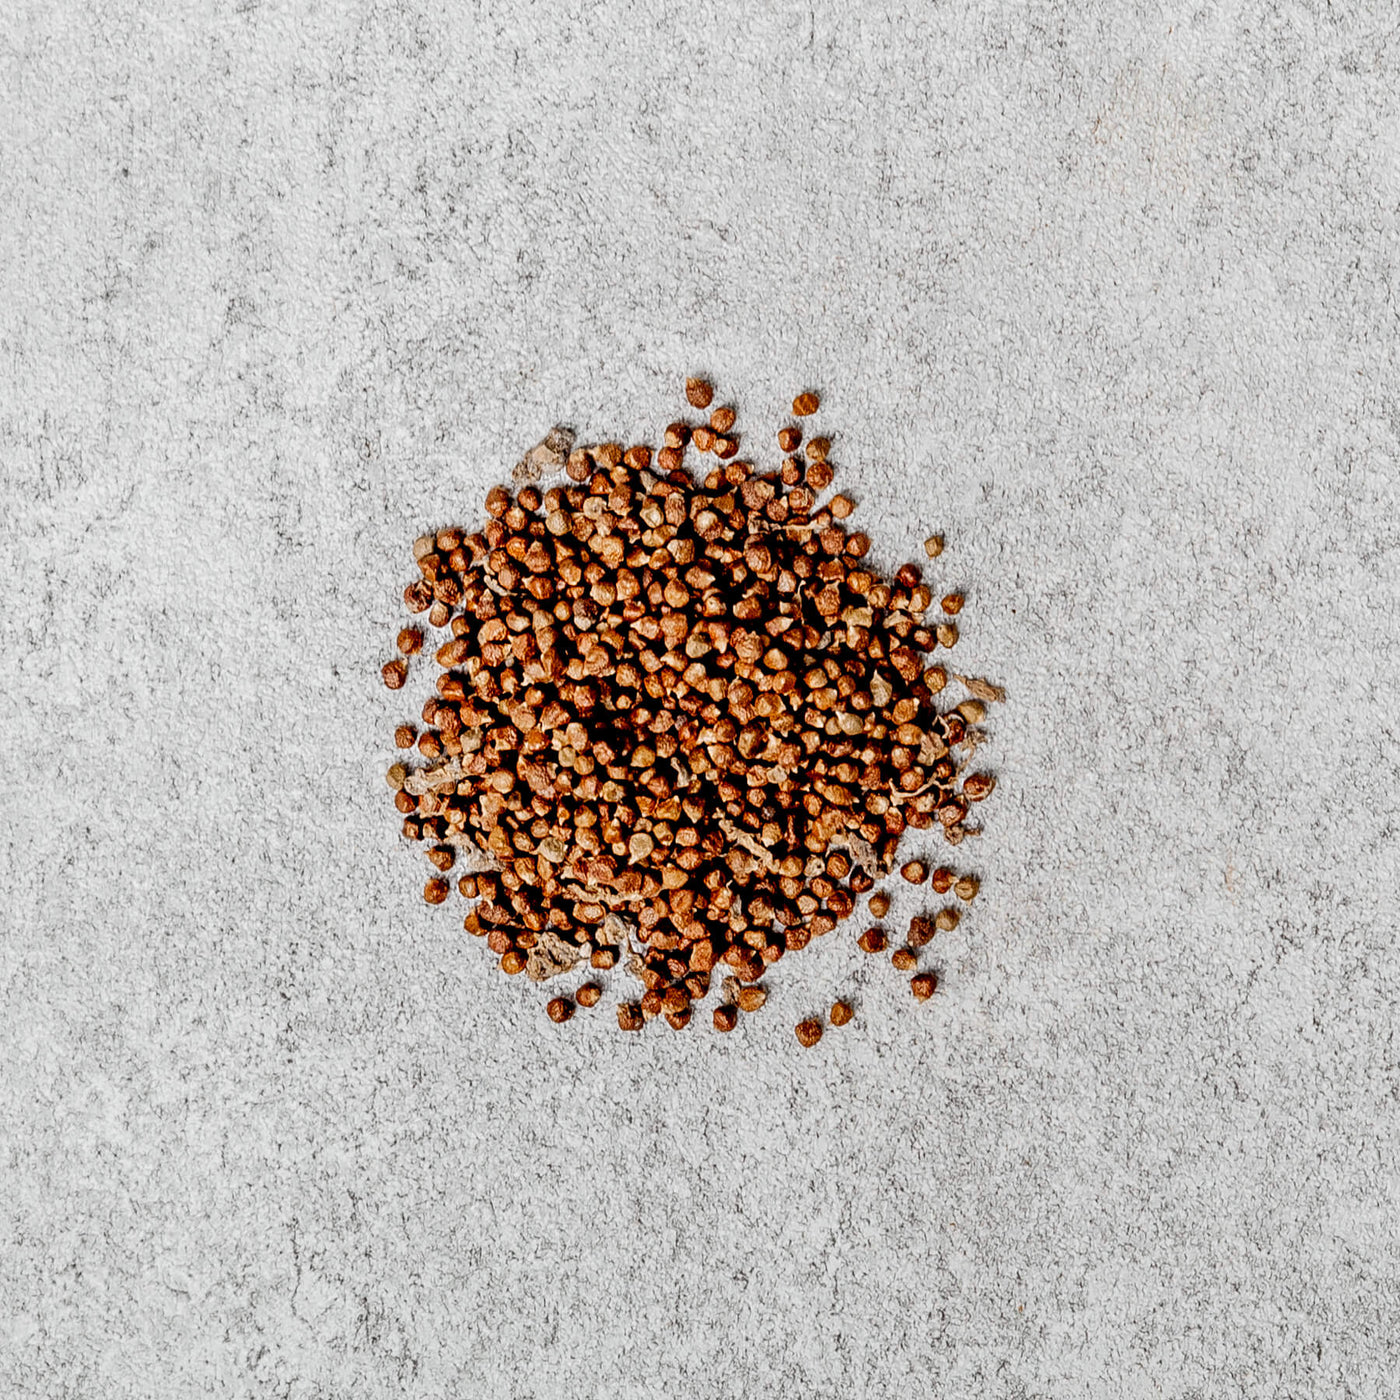 Efom Wisa - Dried Pepper from Cote´d´voire